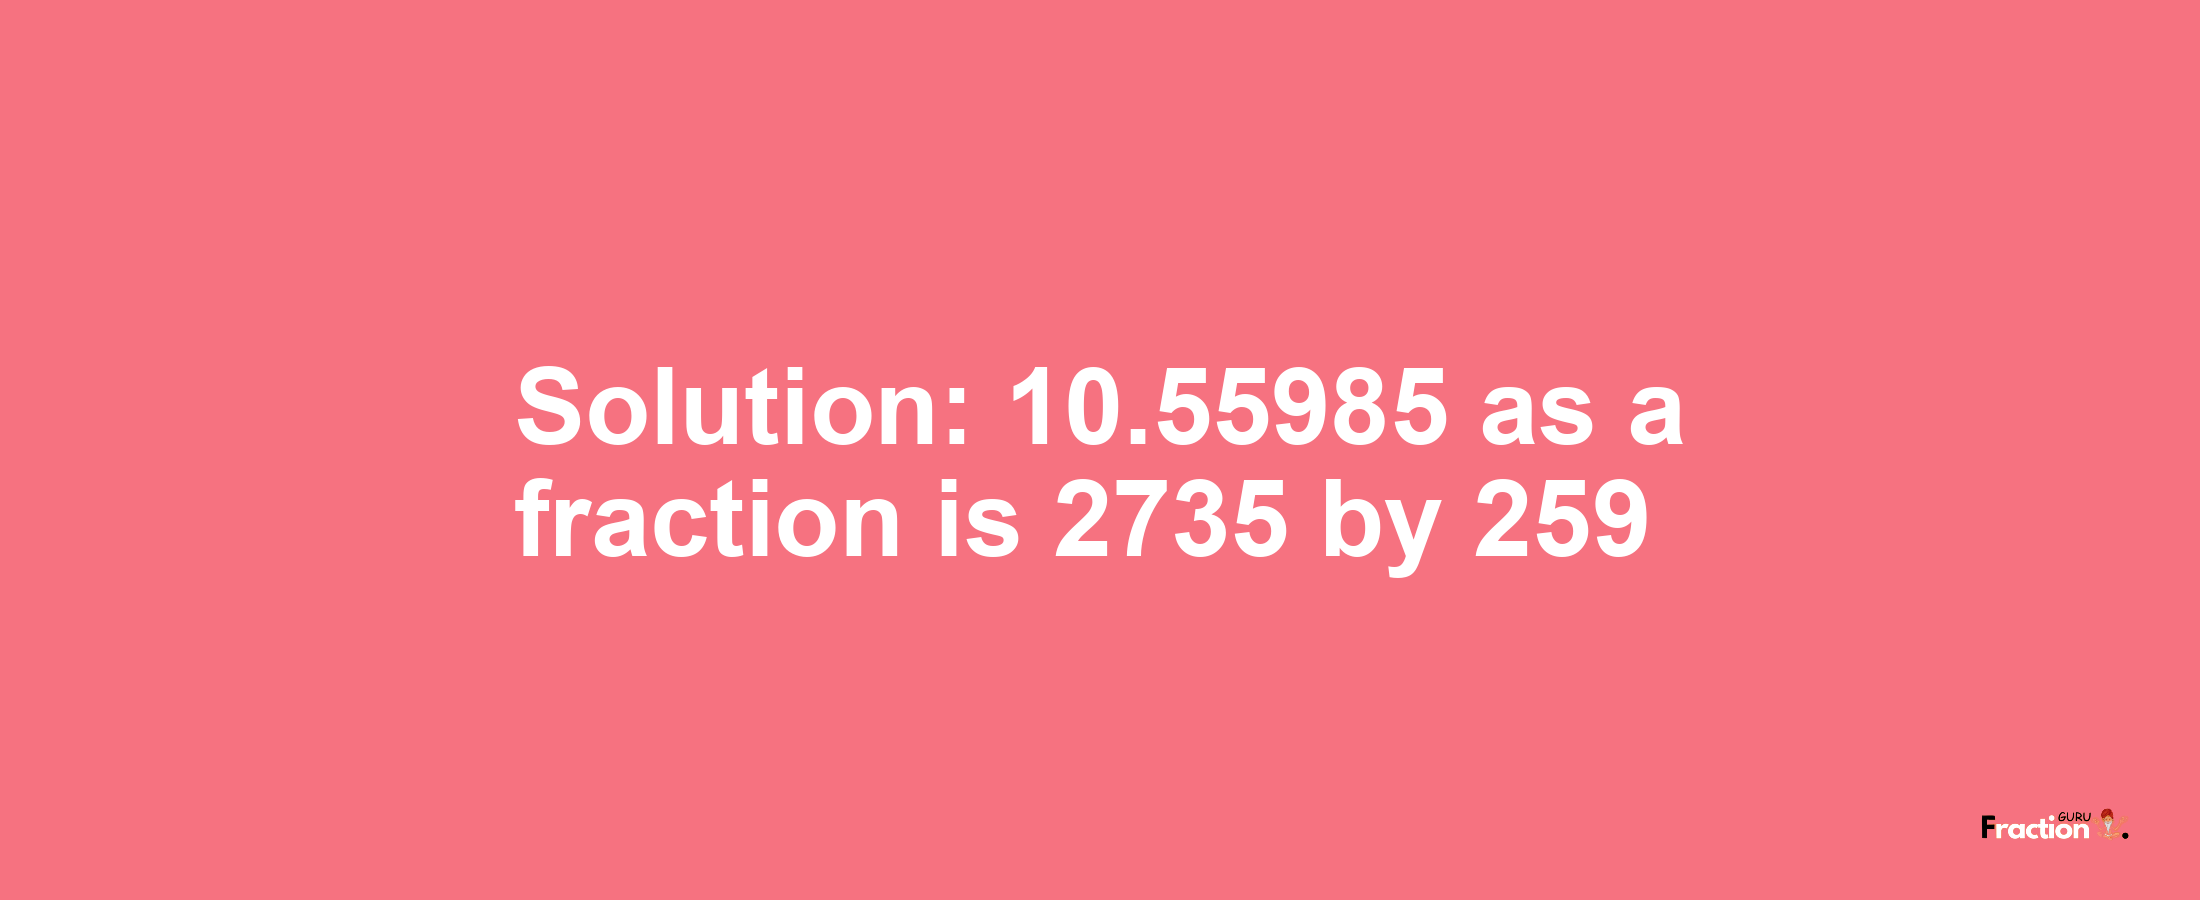 Solution:10.55985 as a fraction is 2735/259